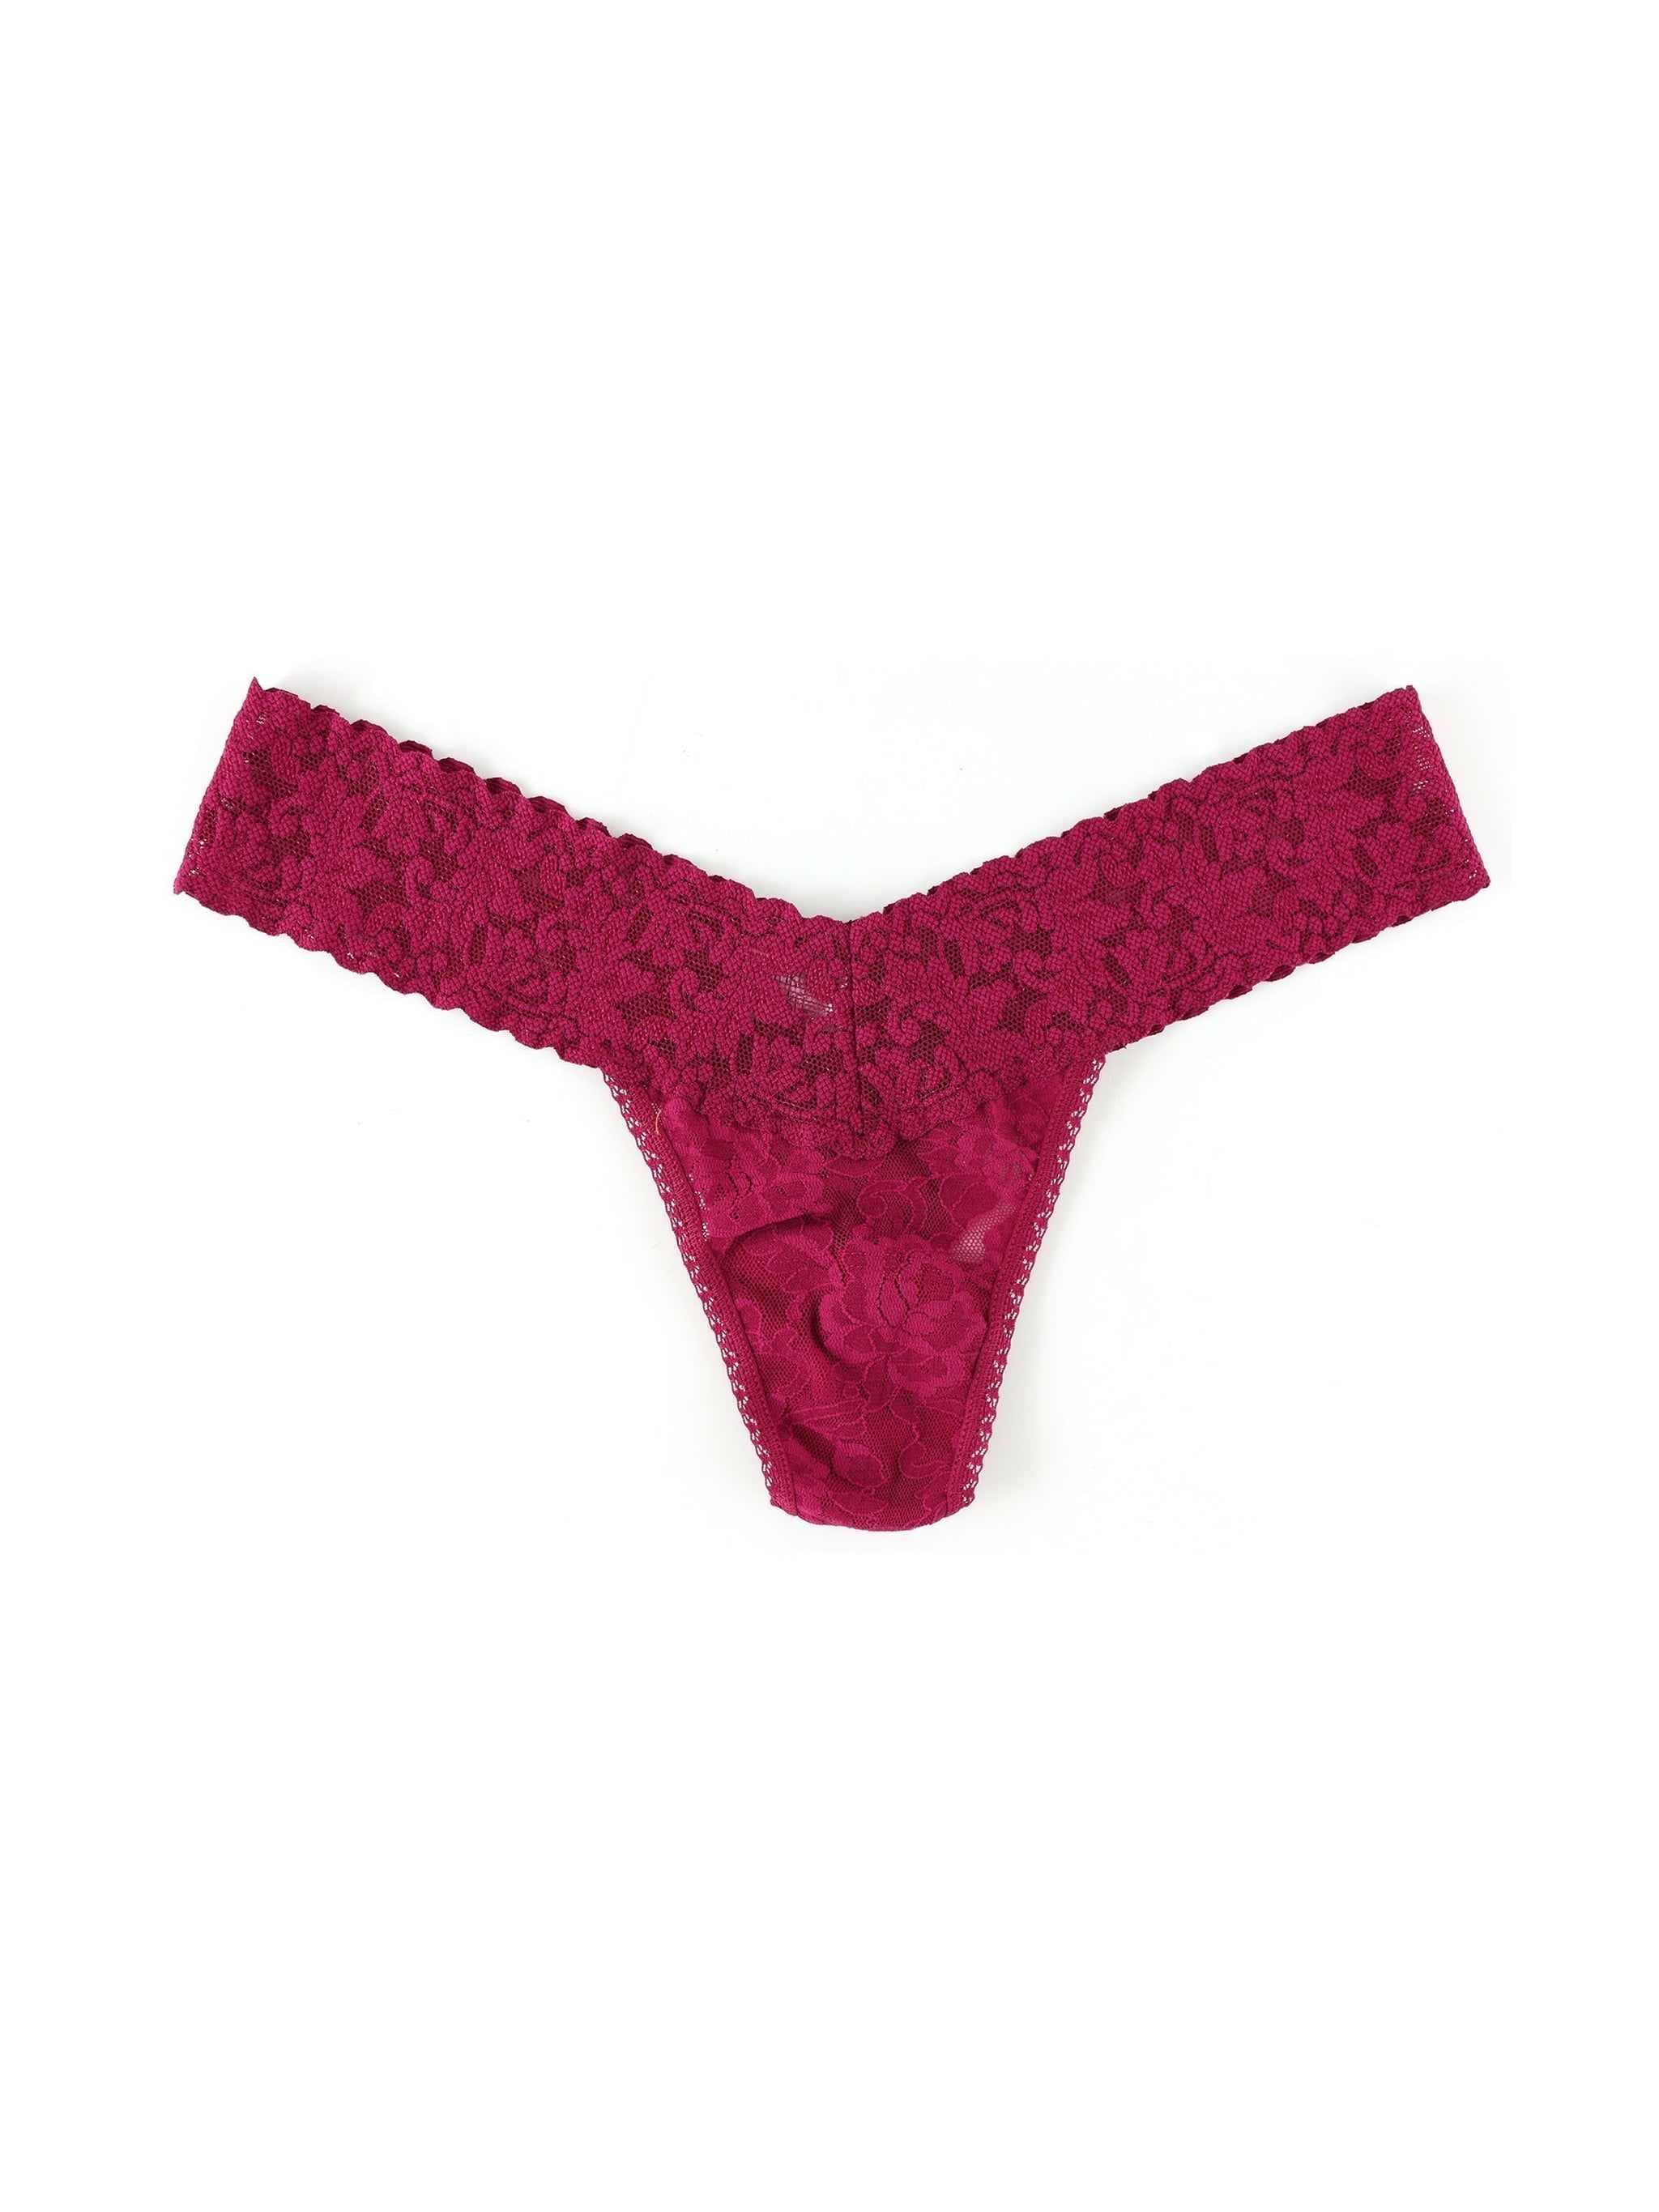 Tropical Trim Thong Panty in Red Bandana  Lace thong panties, Bandana  lace, Red bandana